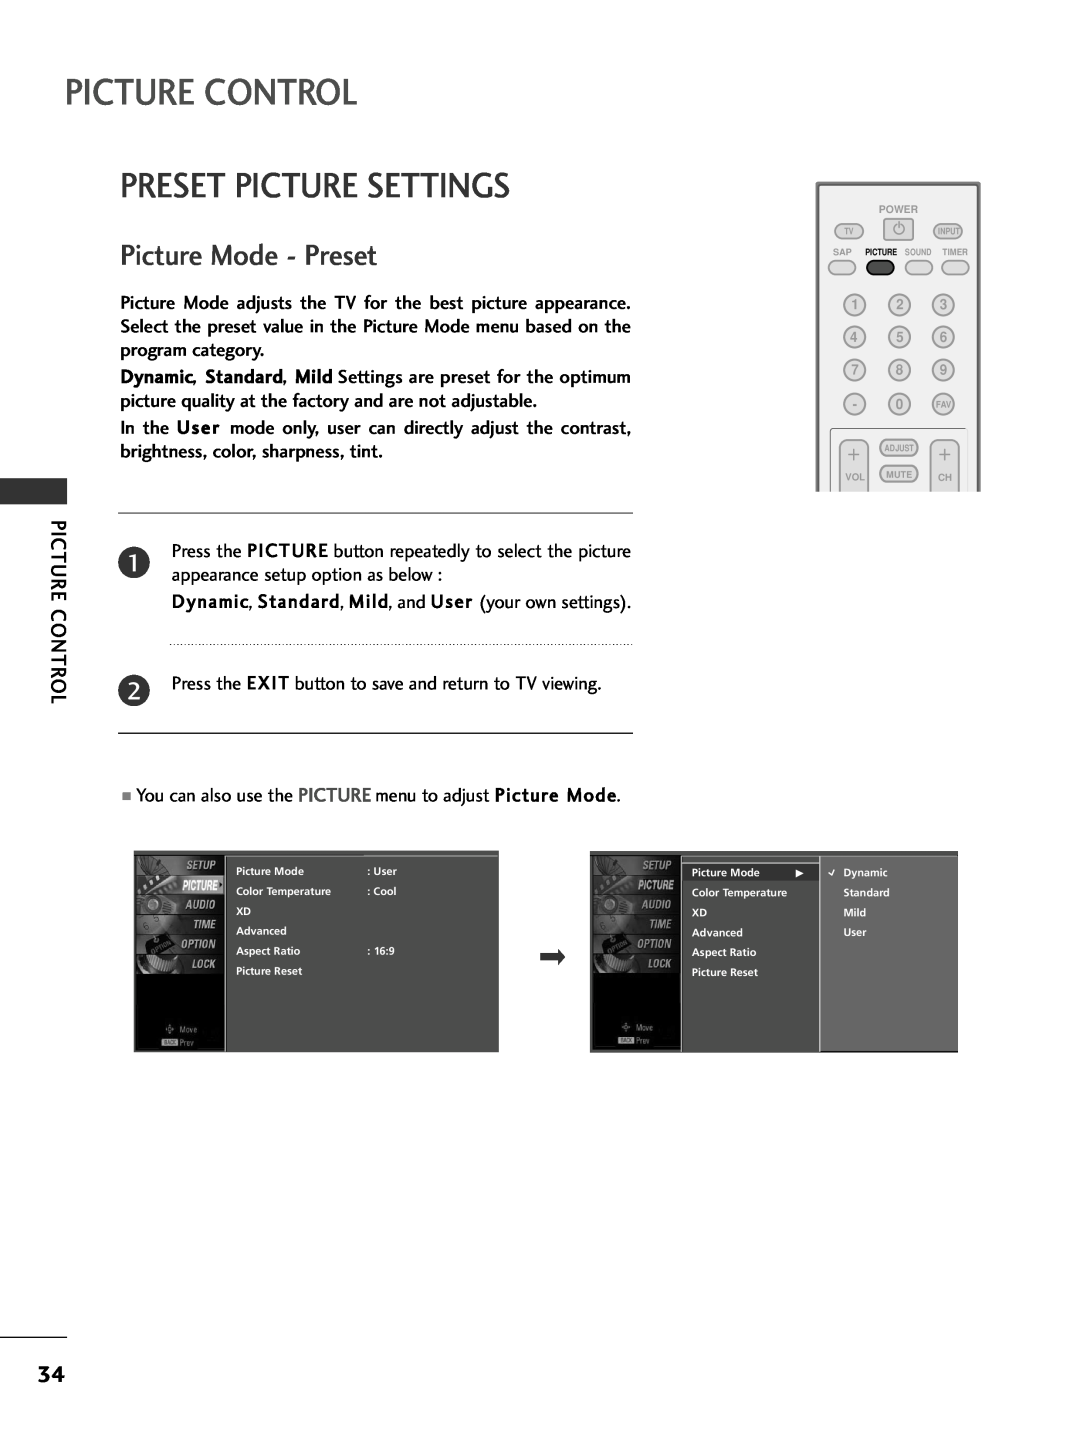 LG Electronics 32PC5DVC owner manual Picture Control, Preset Picture Settings, Picture Mode - Preset 